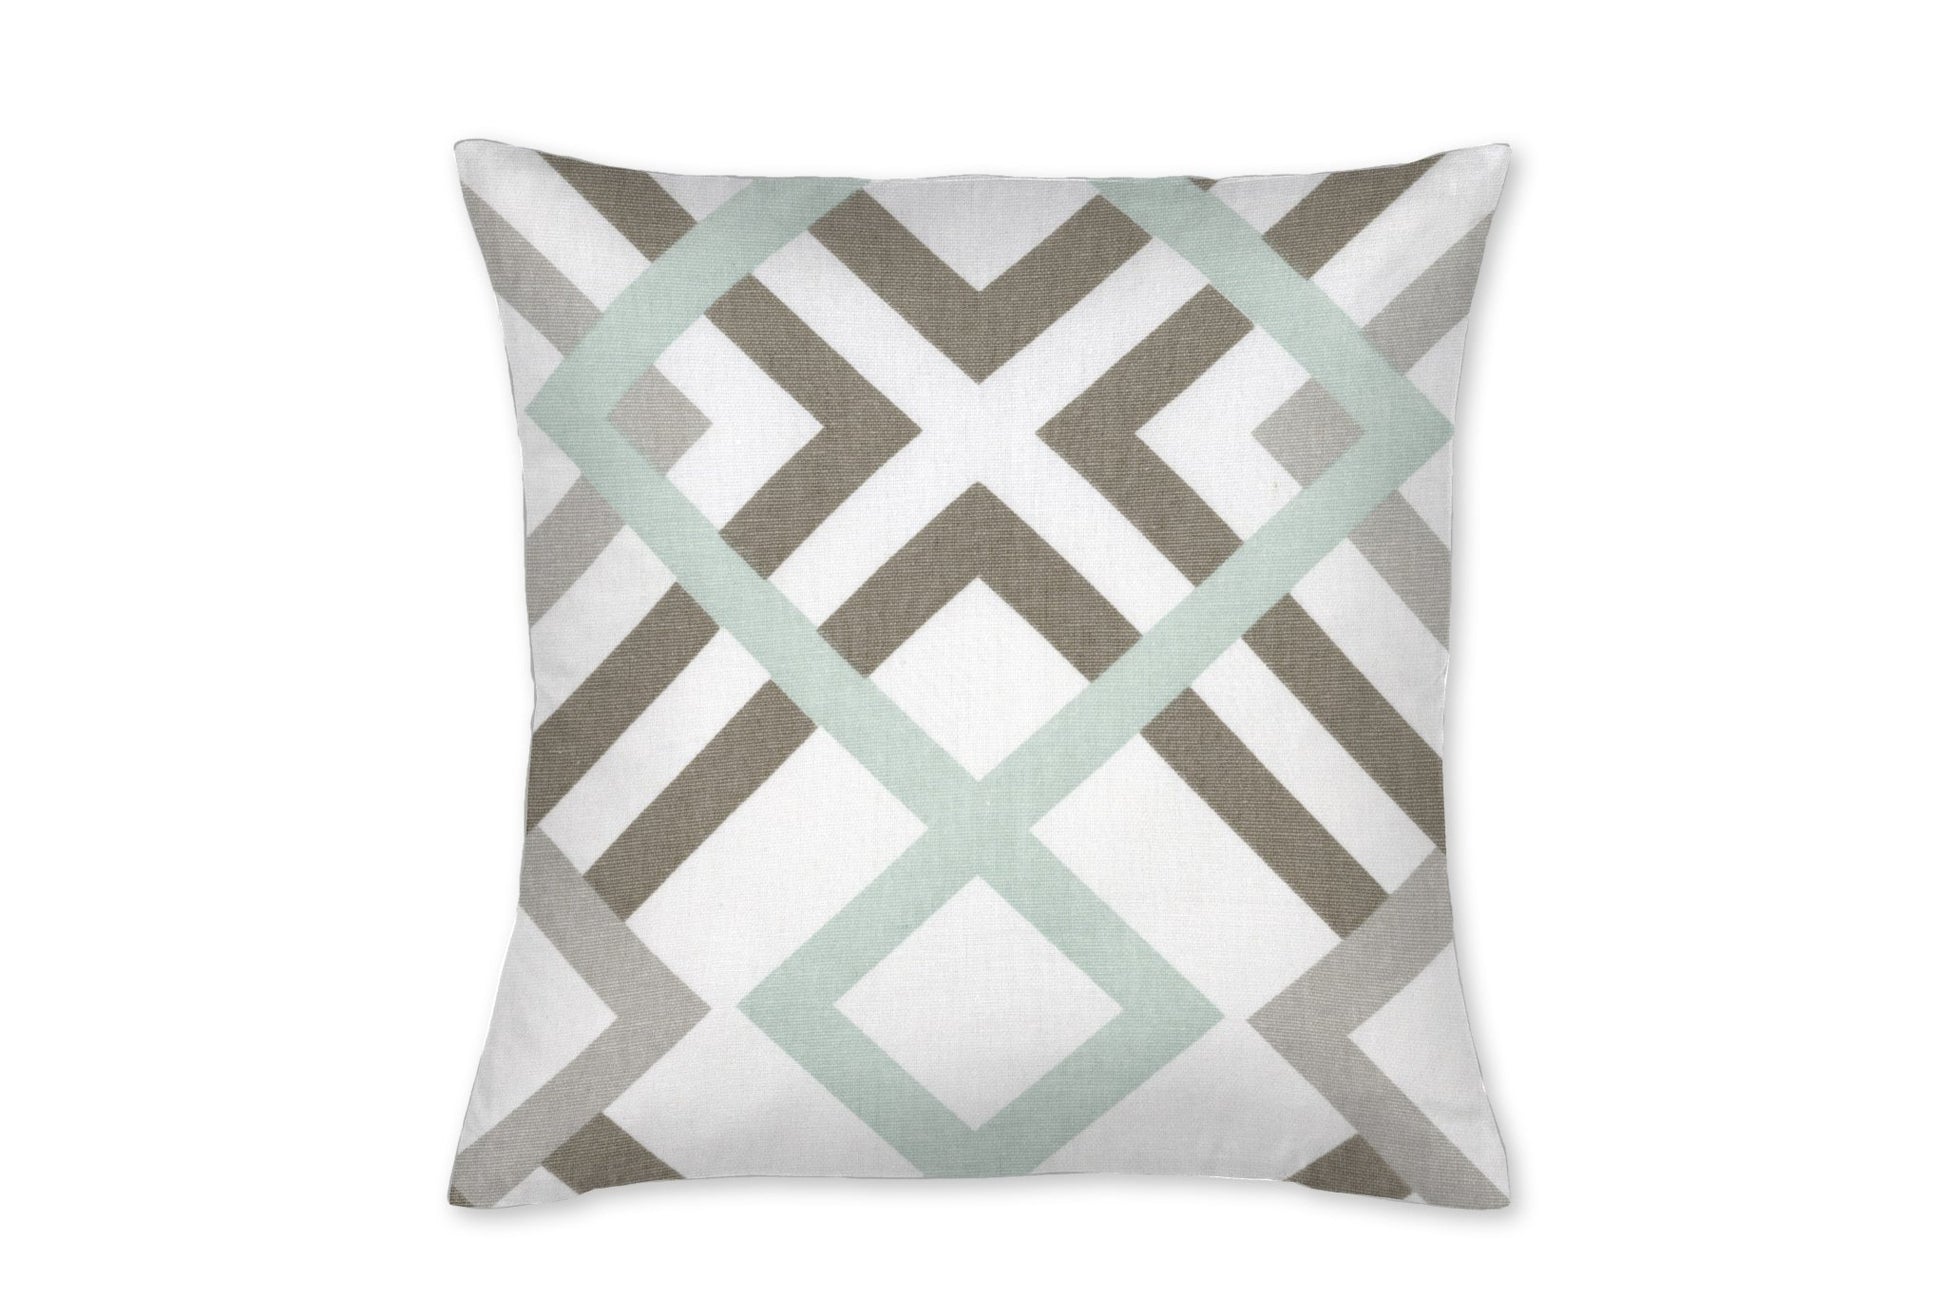 Robins Egg and Taupe Geometric Throw Pillow - New Arrivals Inc